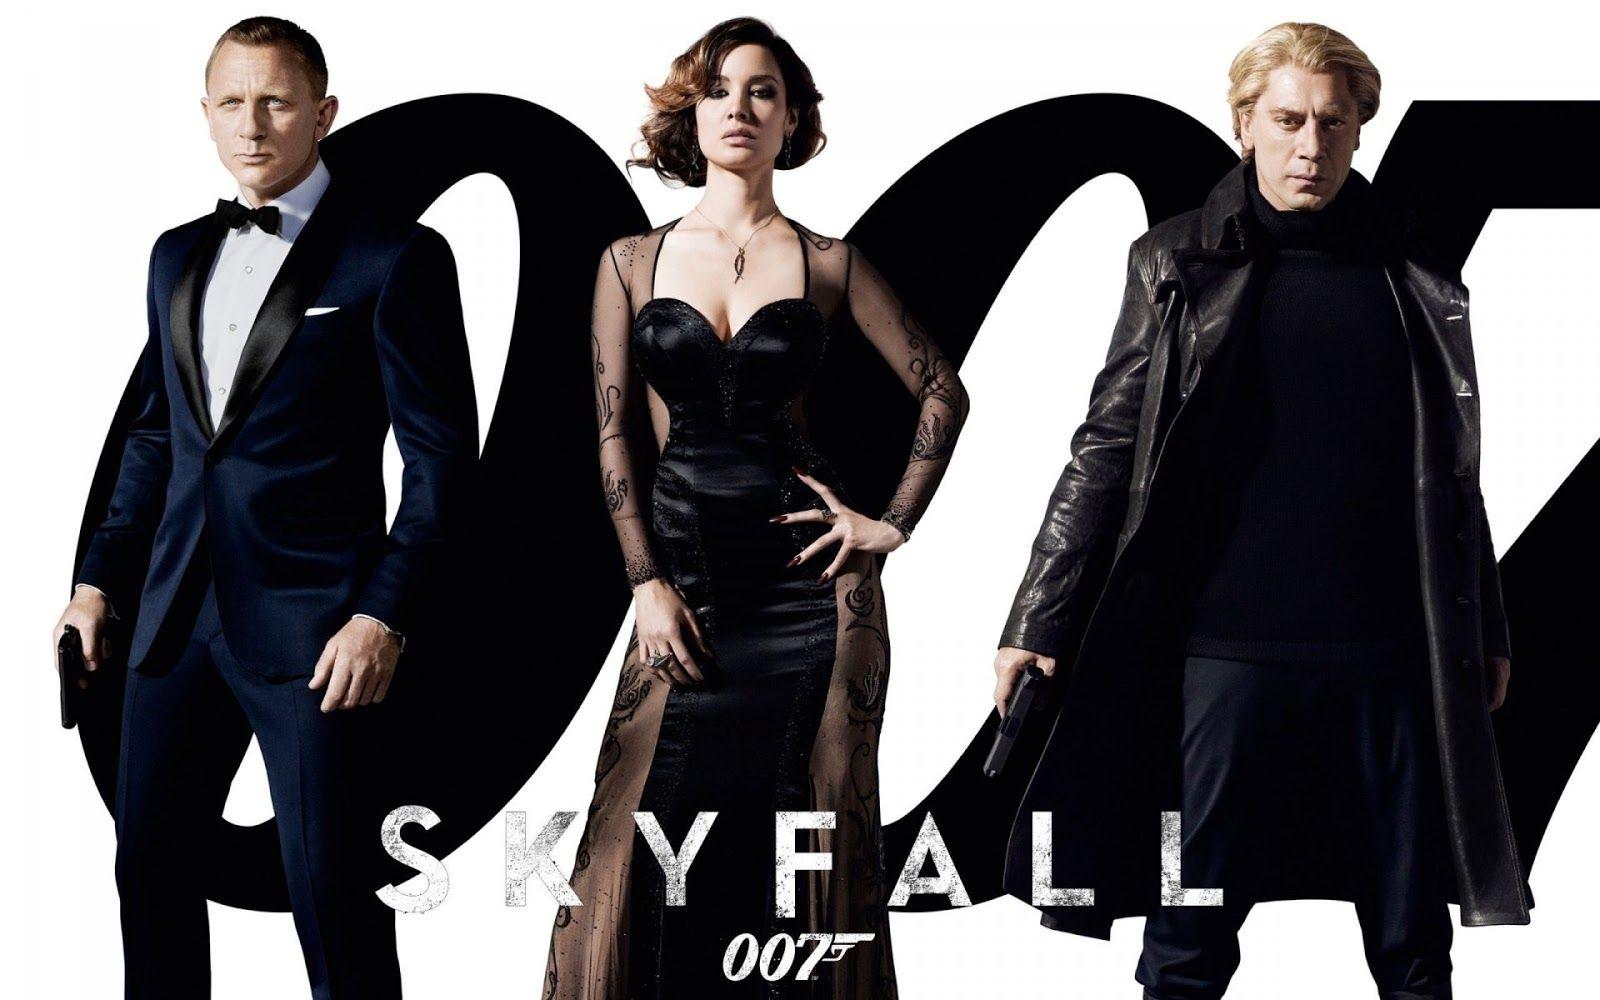 James Bond 007 Skyfall HD Wallpaper for iPhone. Wallpaper For iPhone